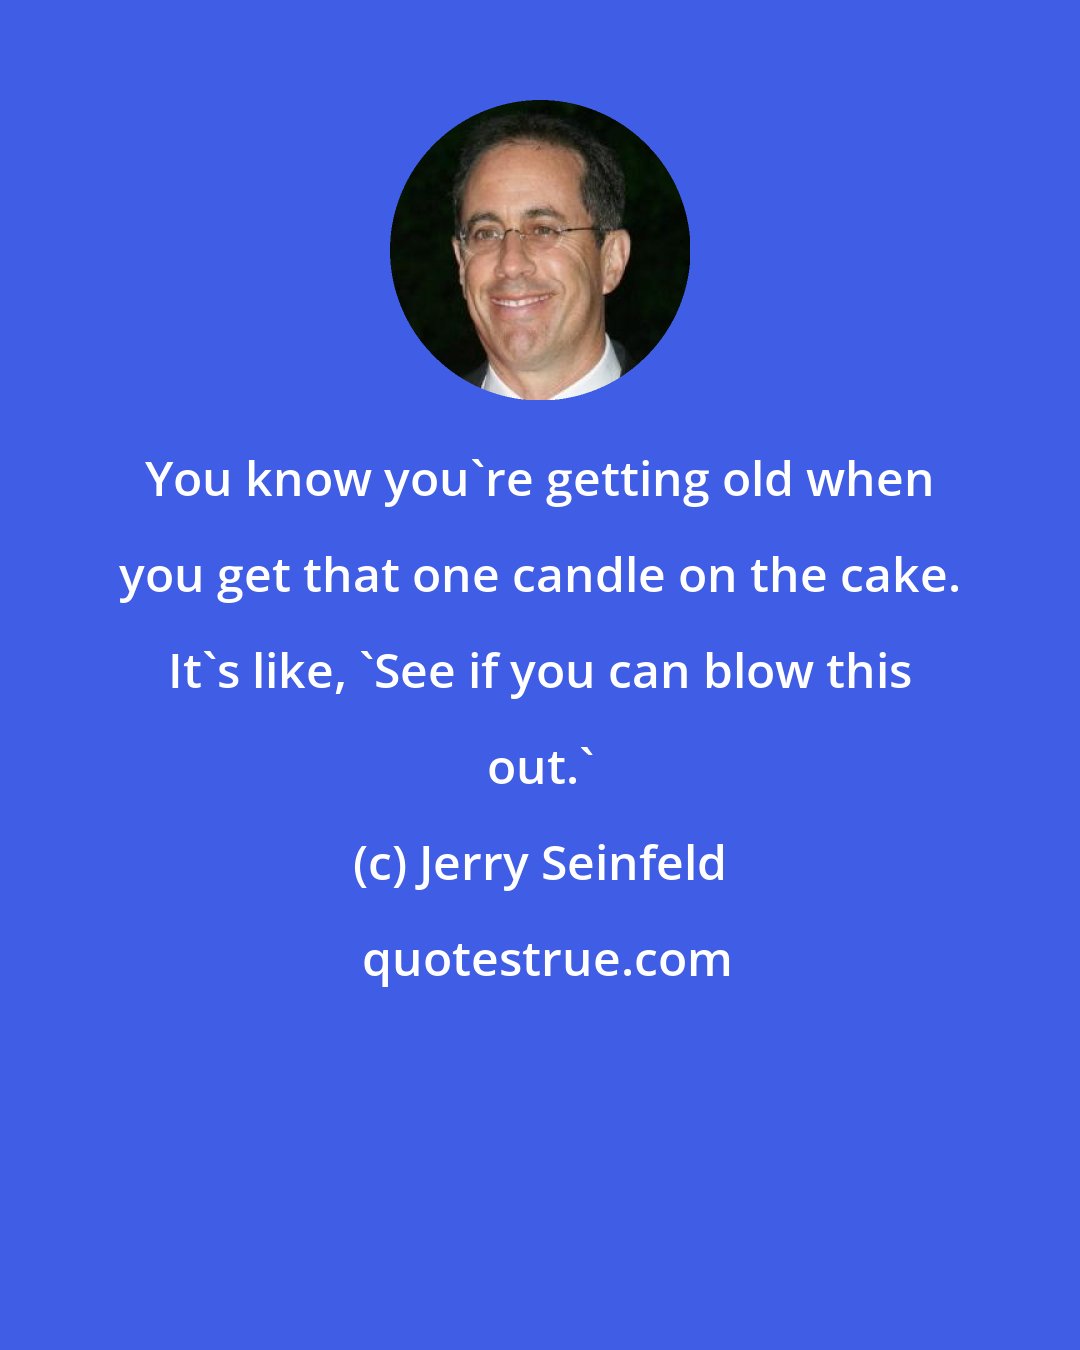 Jerry Seinfeld: You know you're getting old when you get that one candle on the cake. It's like, 'See if you can blow this out.'